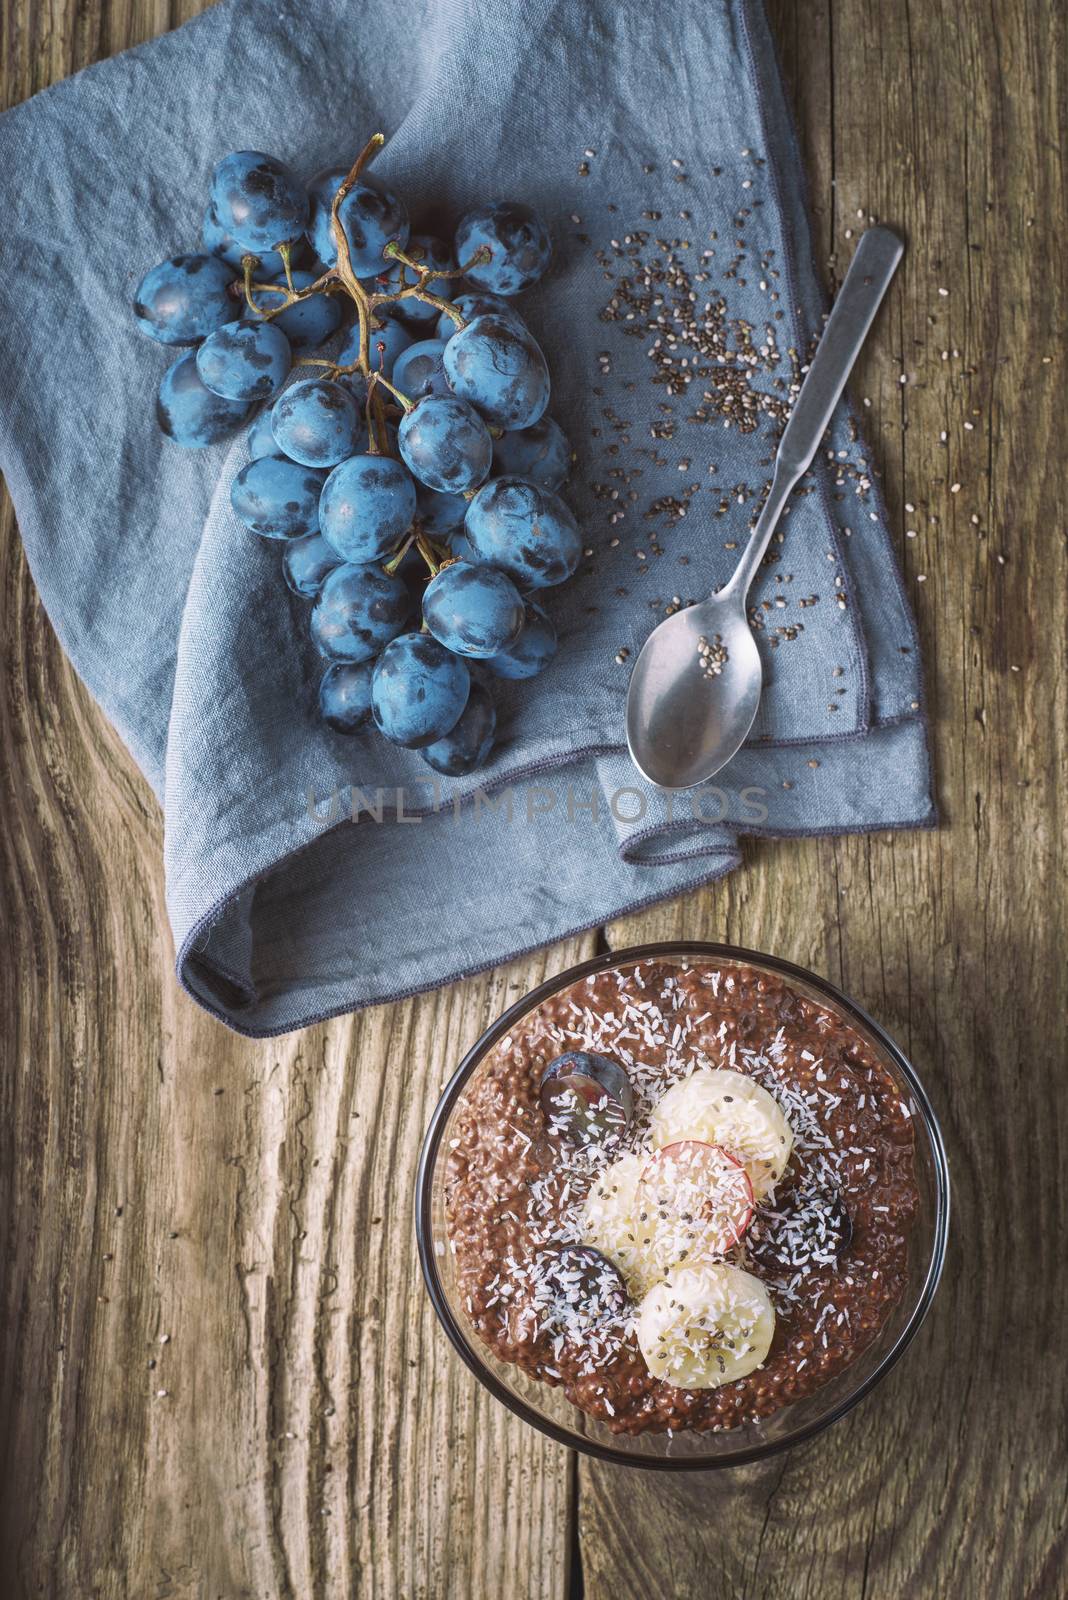 Chocolate chia pudding with fruit in the glass bowl top view by Deniskarpenkov